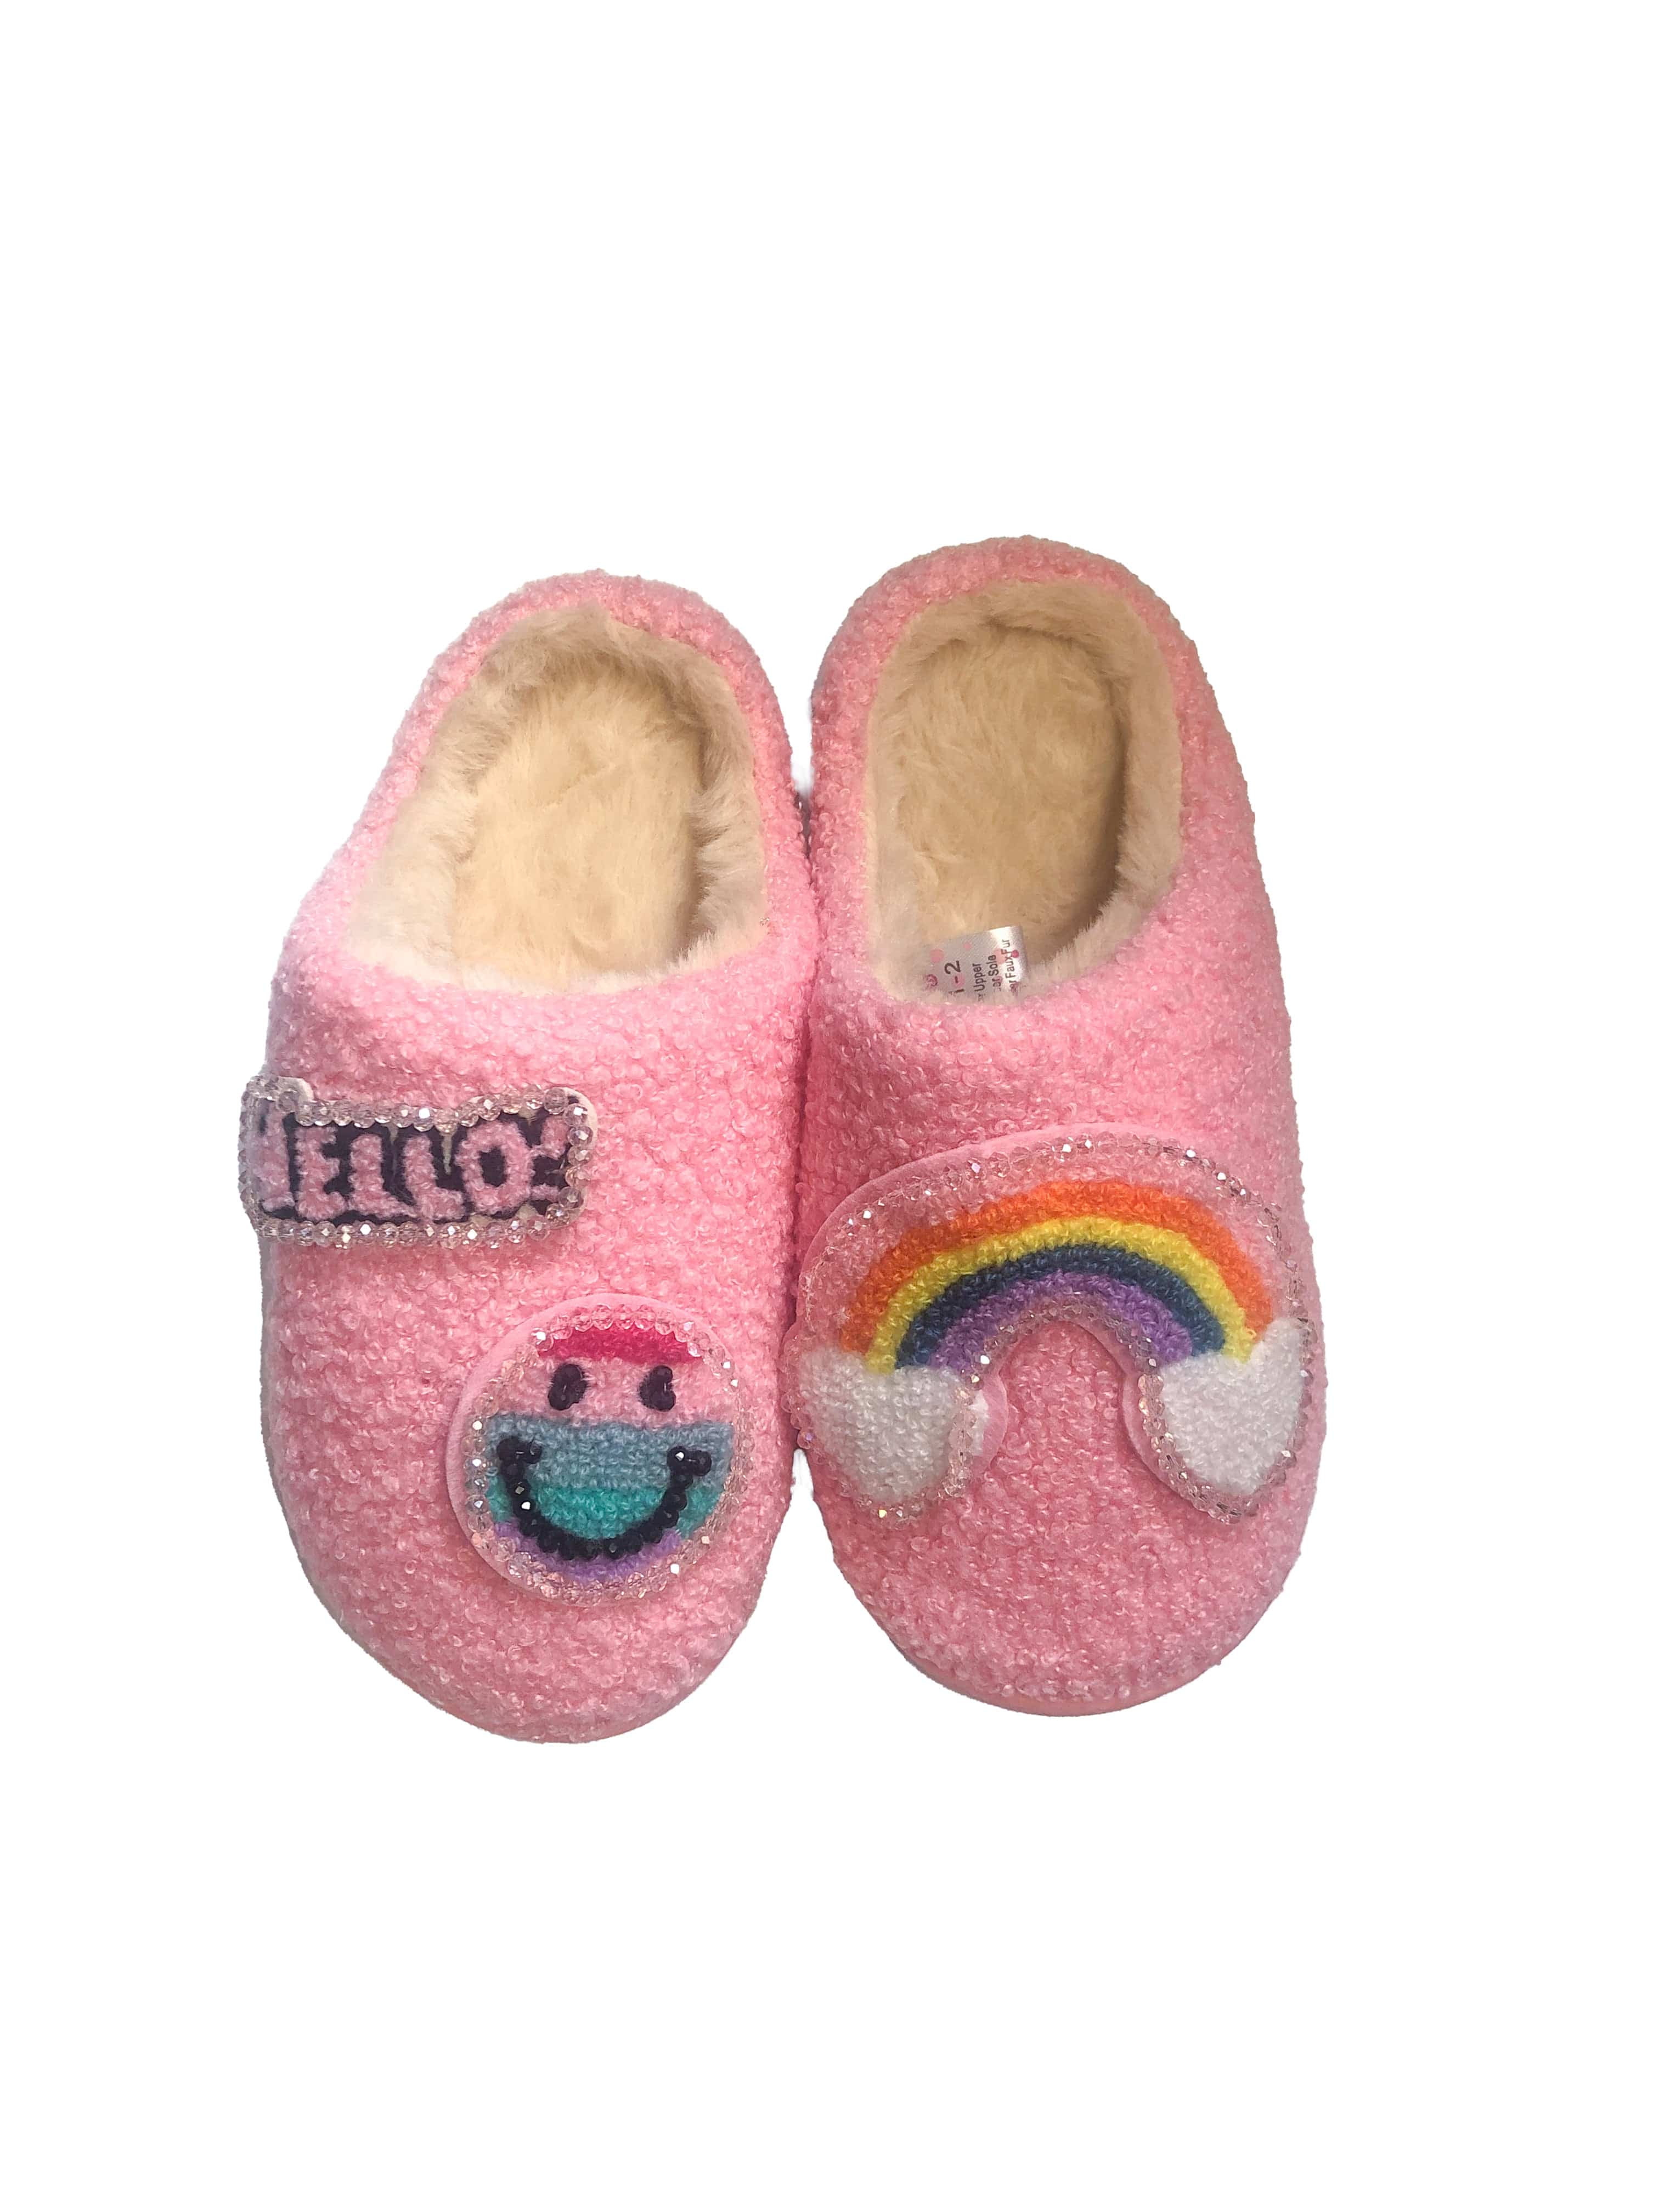 Girl's Embroidered Pink Sherpa Patched Slippers - Twinkle Twinkle Little One